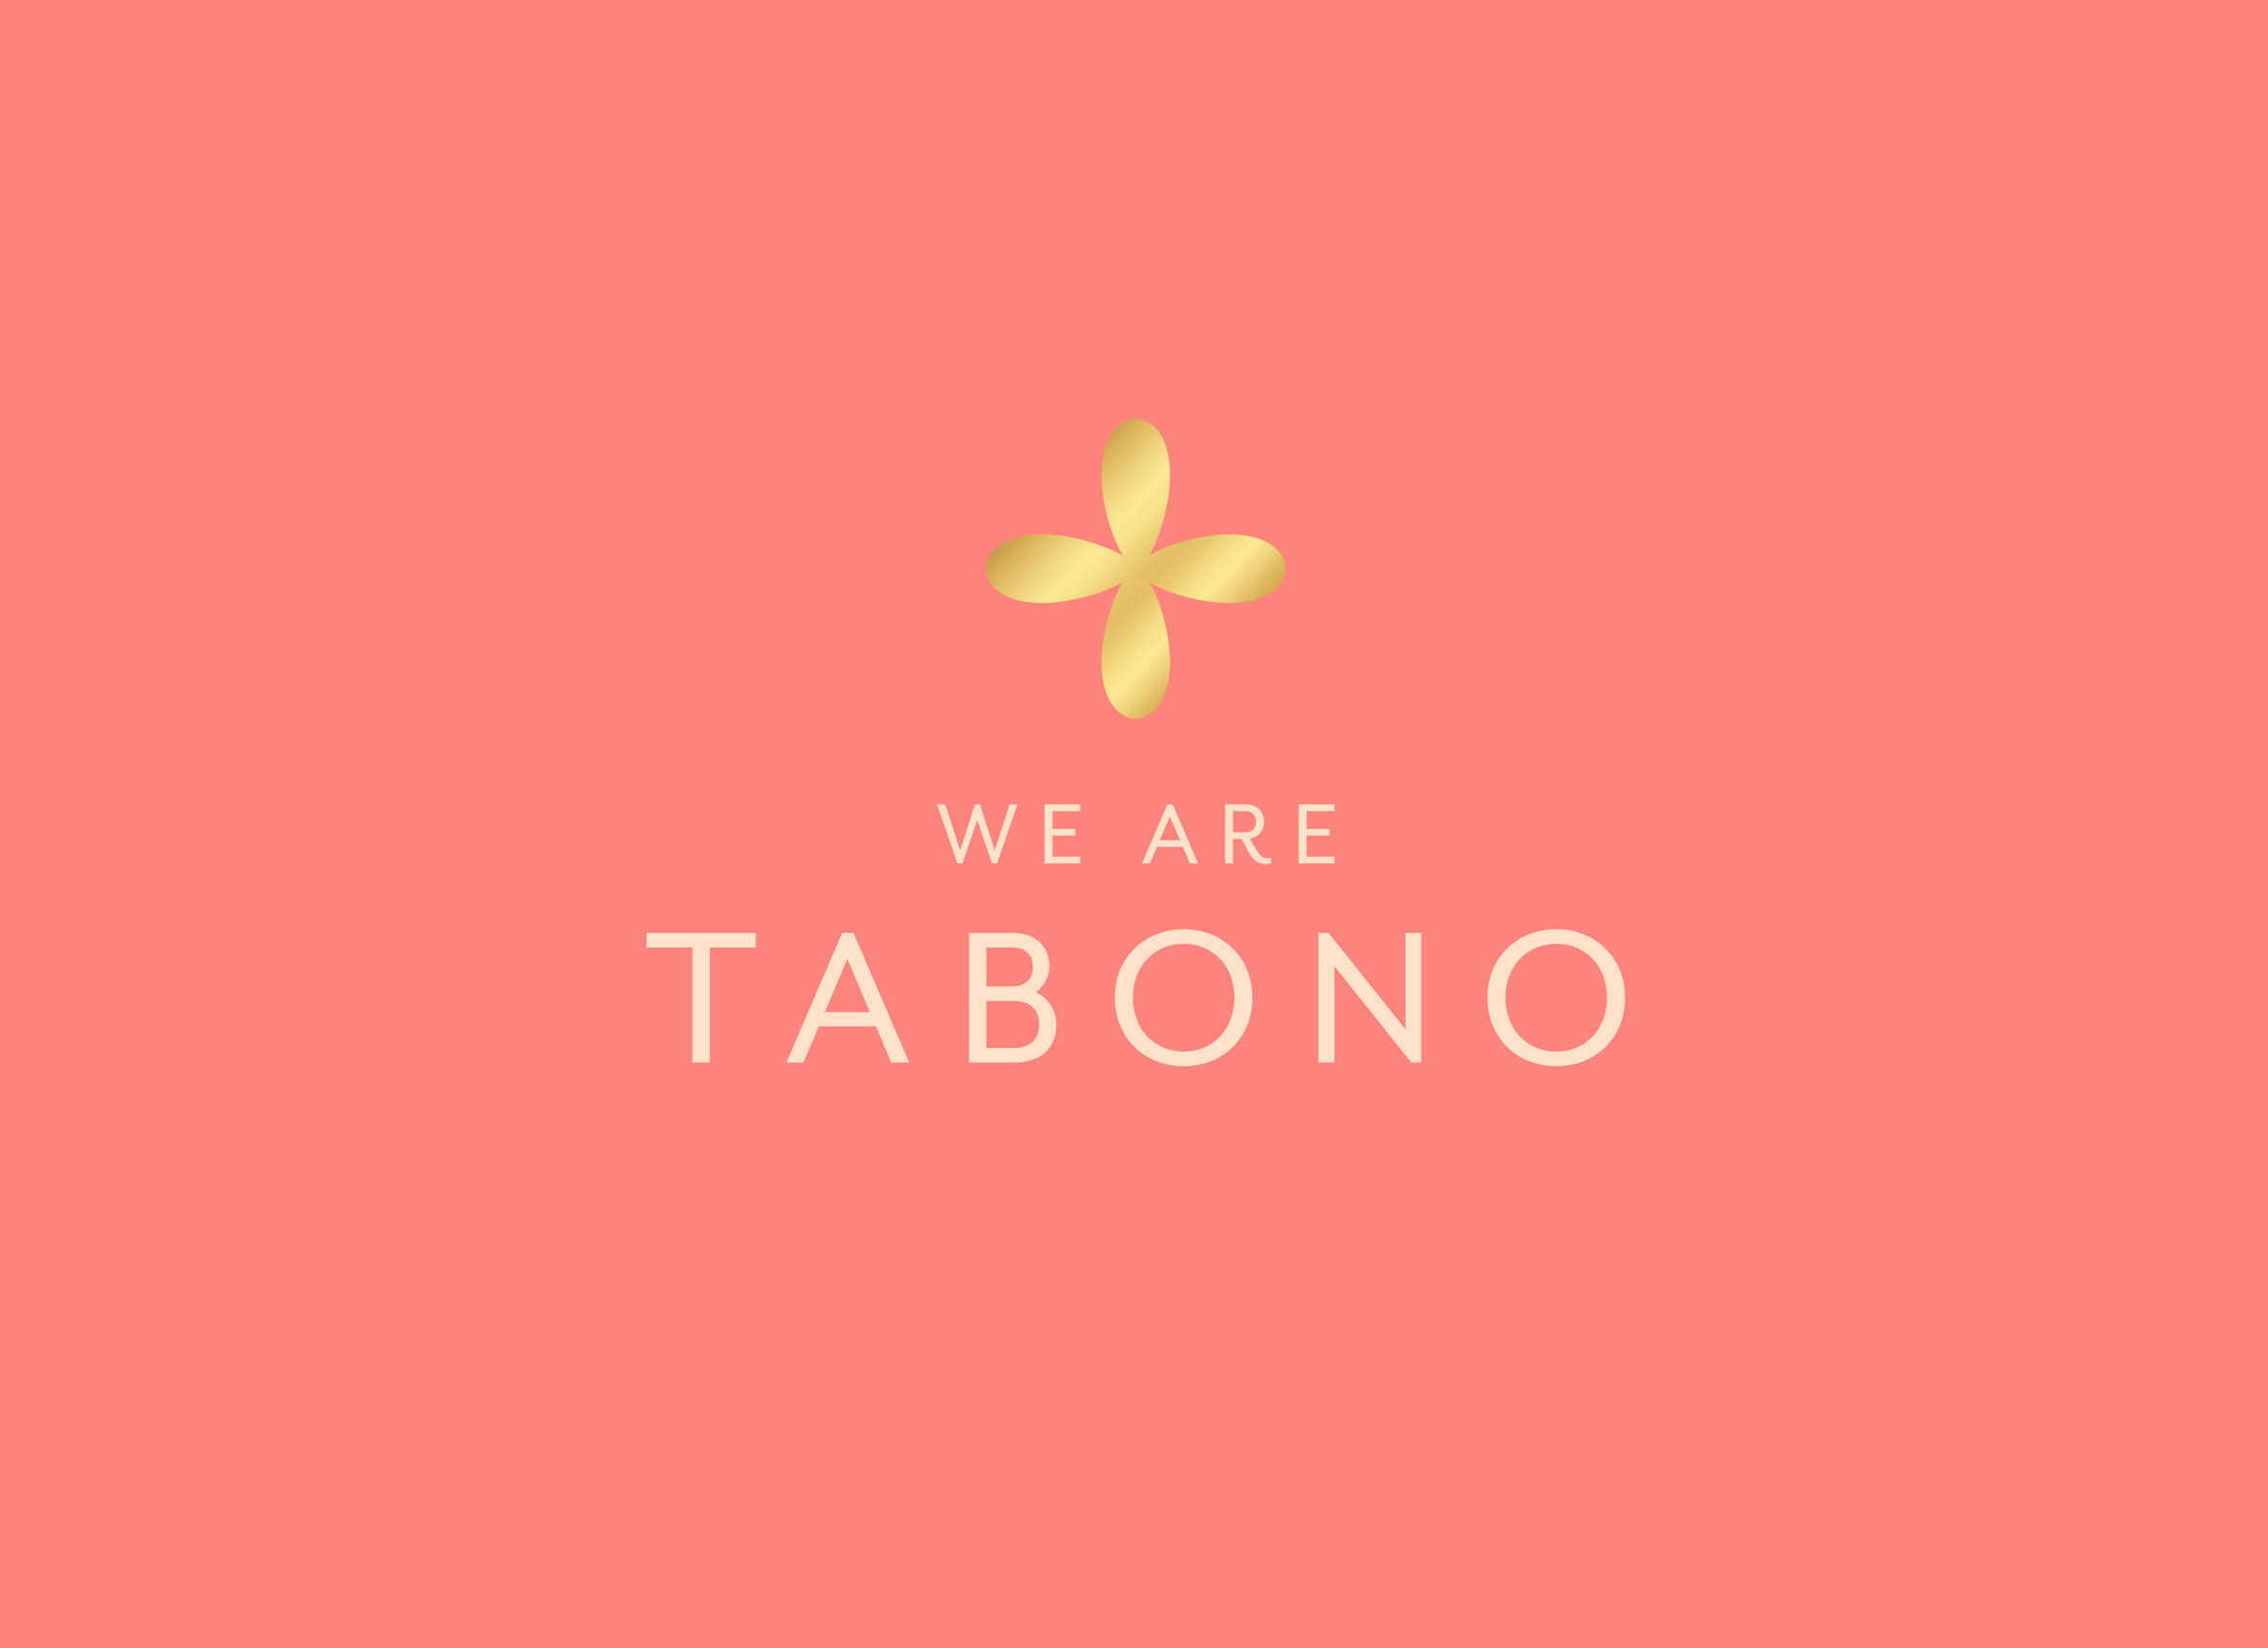 We are Tabono logo pink and gold